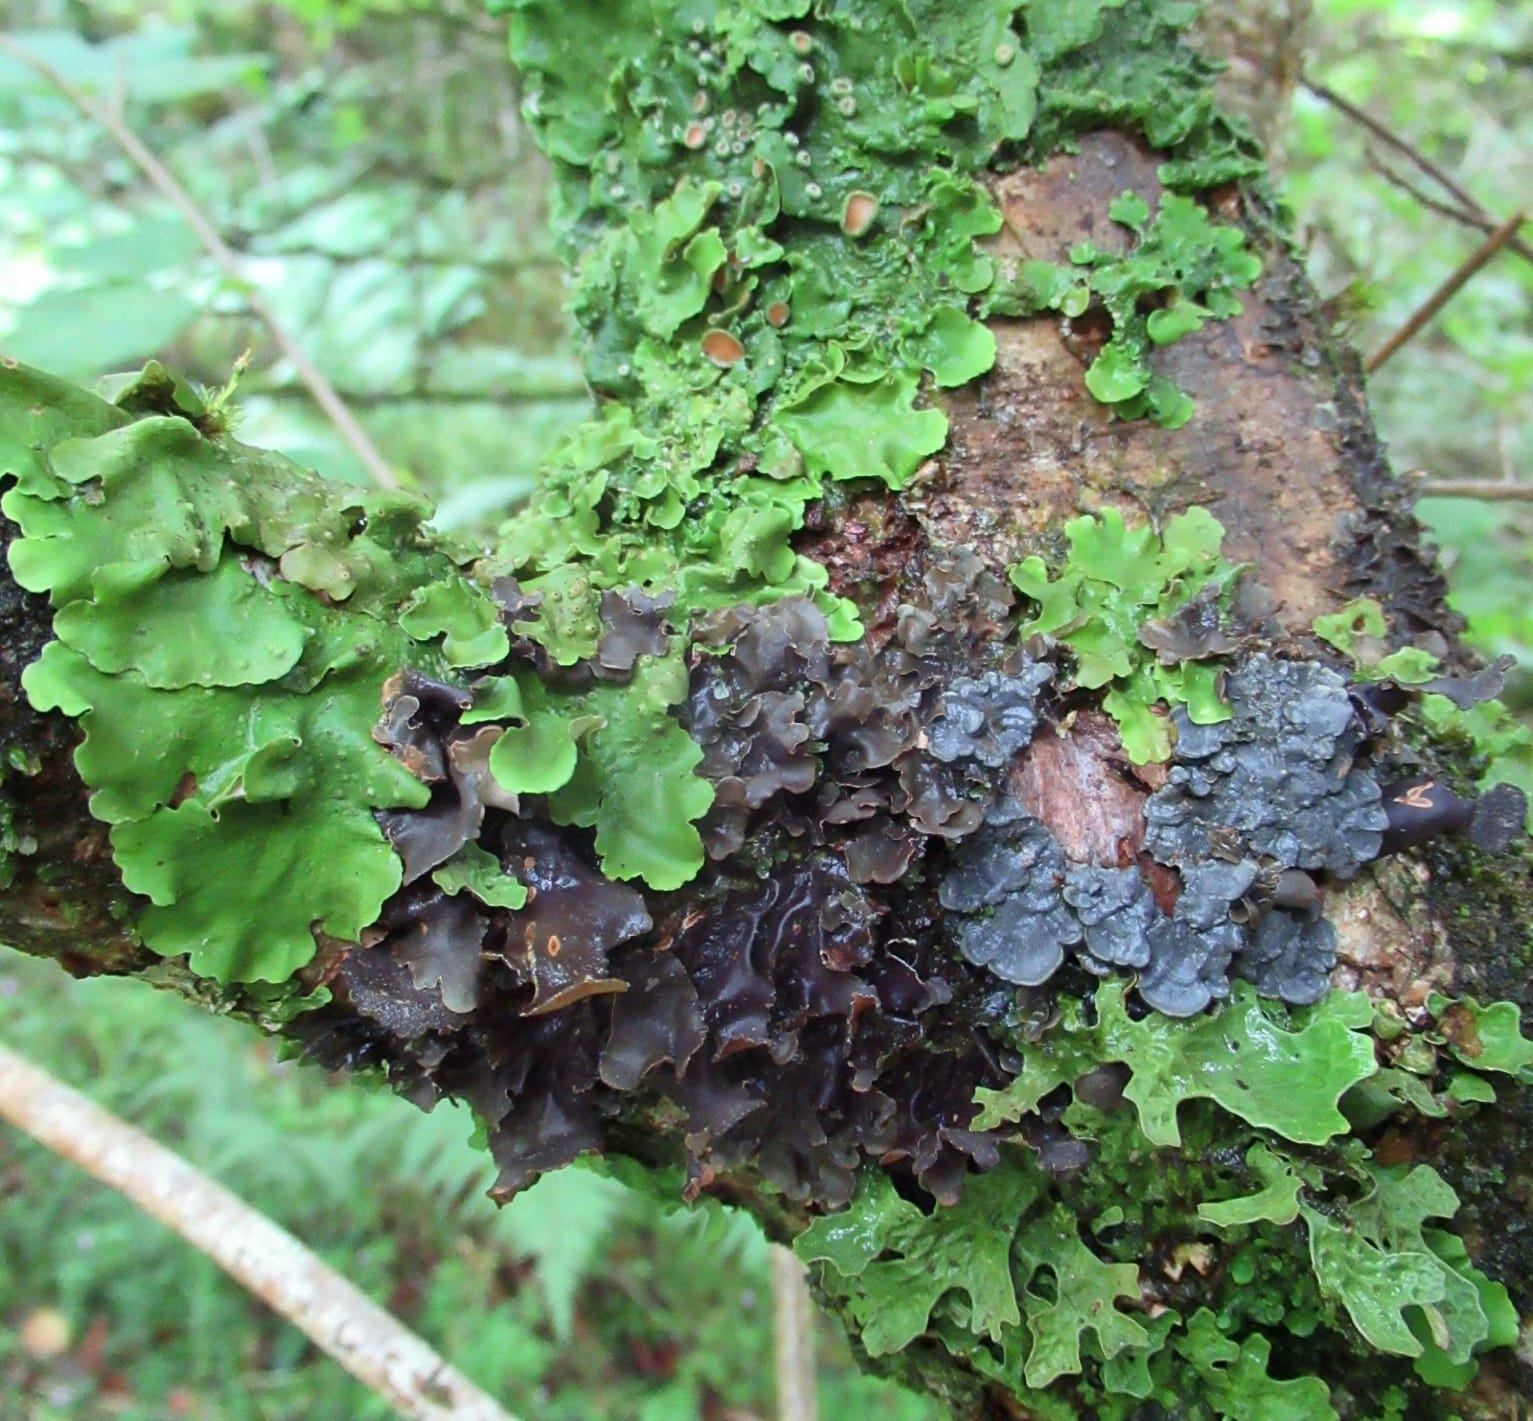 Moss and Lichen species on tree branch